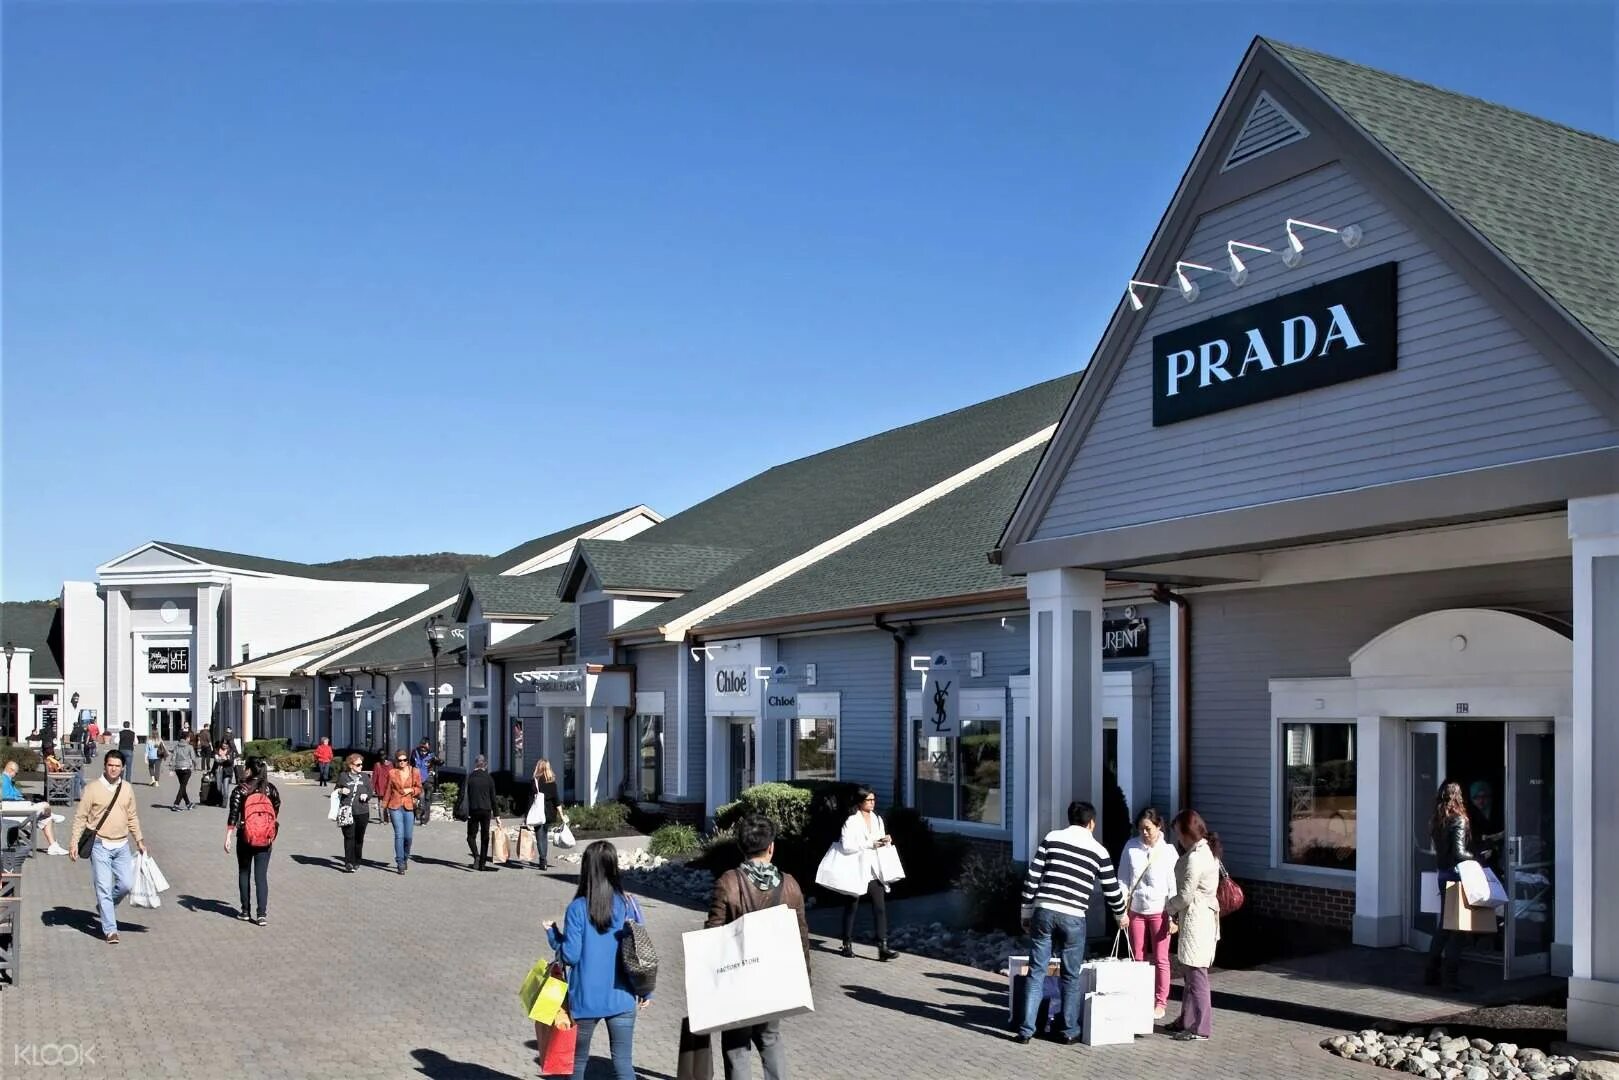 Тц outlet. Woodbury common Premium Outlets в Нью-Йорке. Woodbury Premium Outlet Америка. Woodbury common Outlet. Woodbury common Premium Outlets фото.